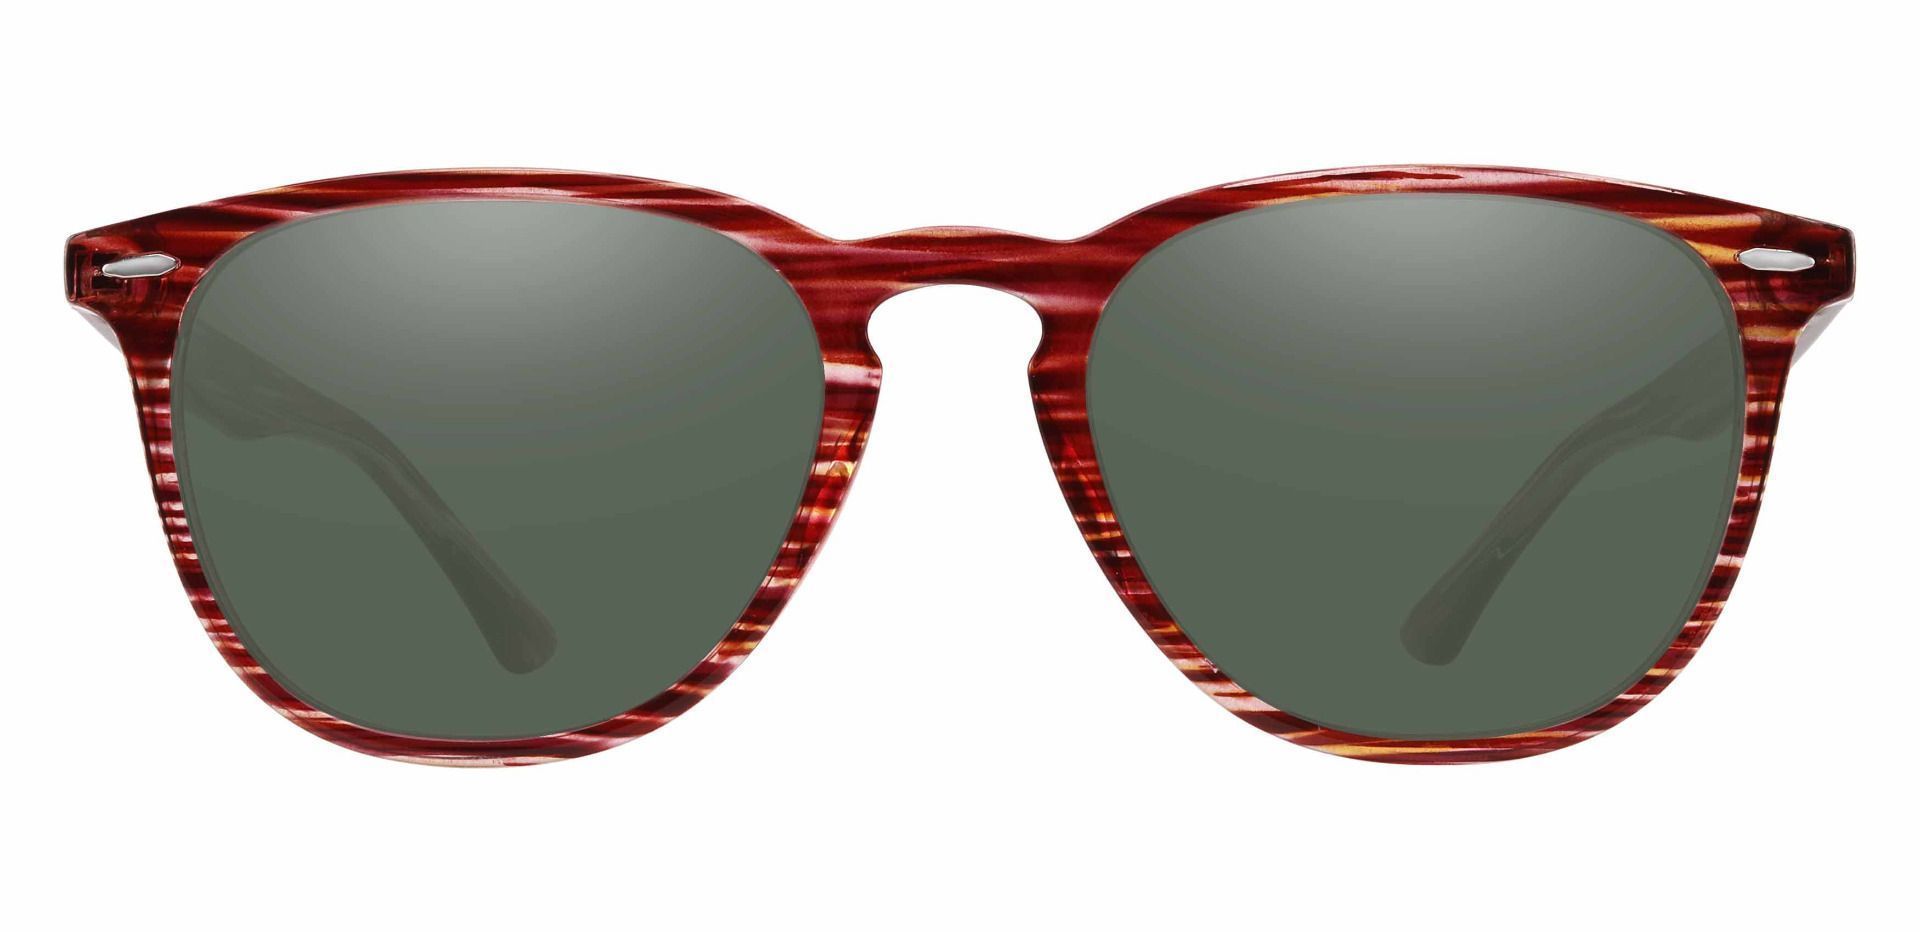 Sycamore Oval Reading Sunglasses - Red Frame With Green Lenses